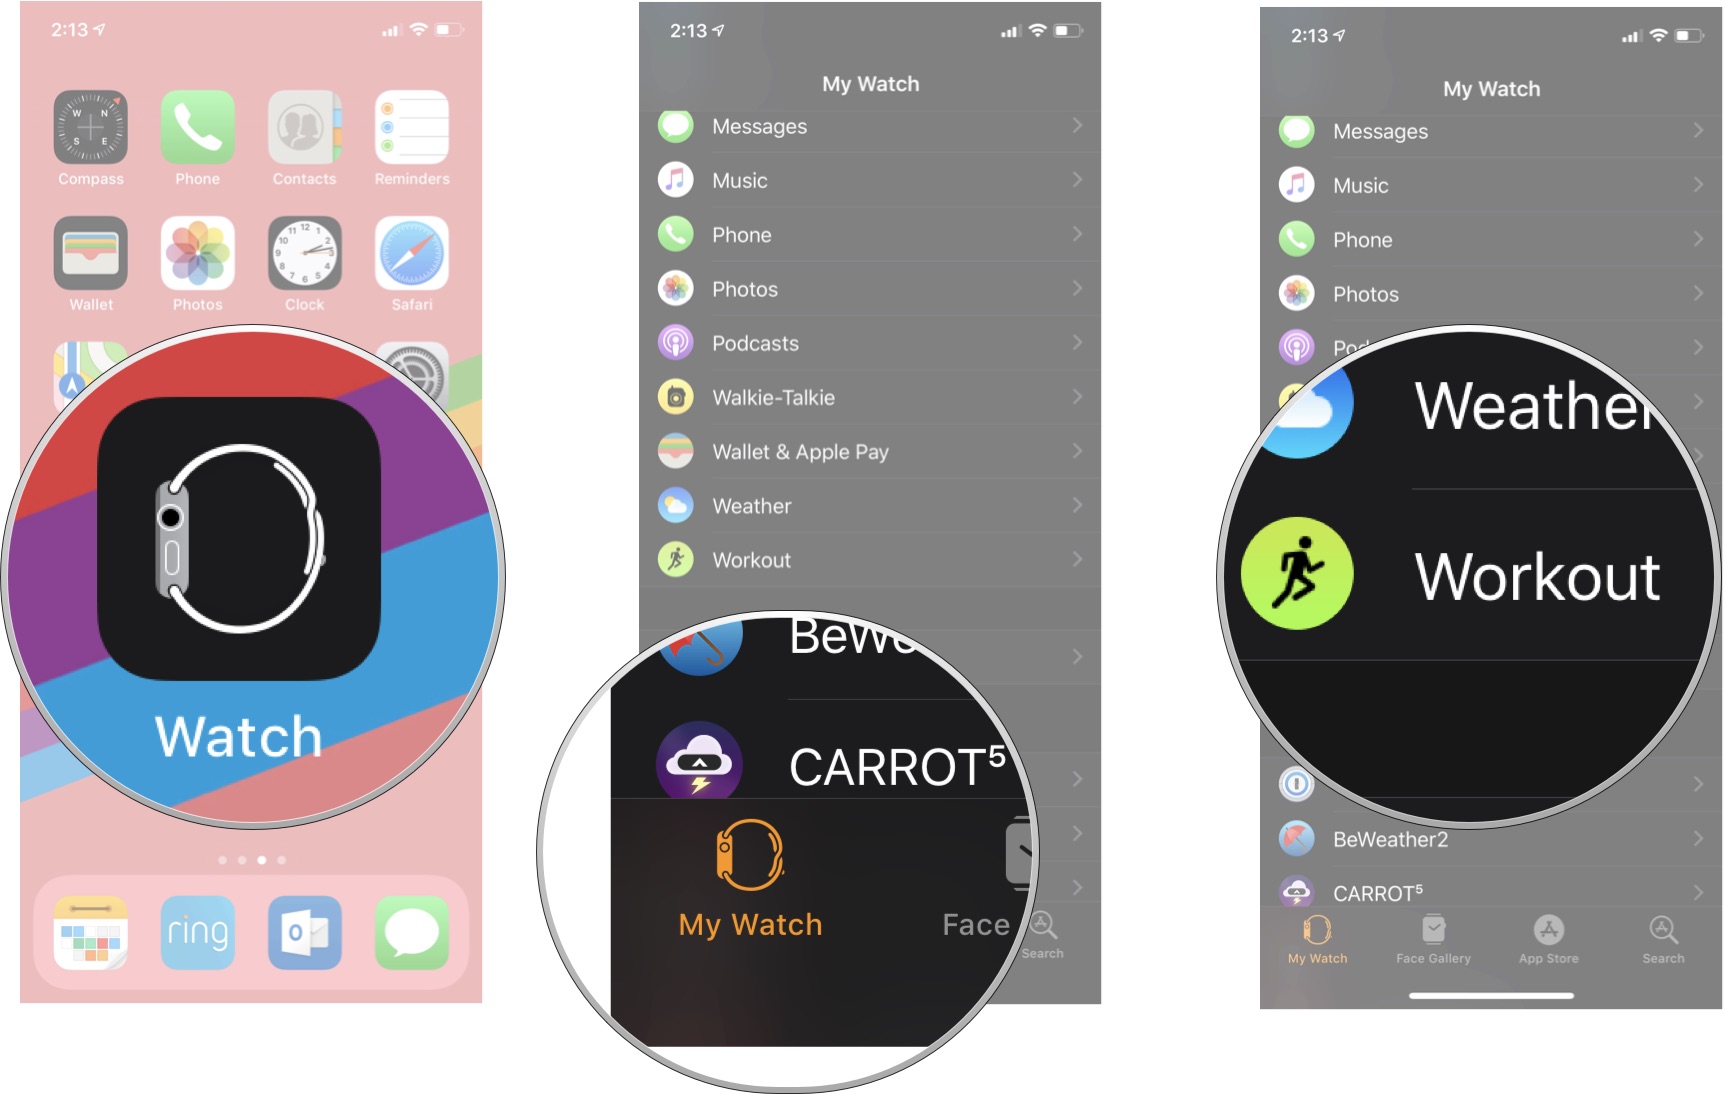 15 Minute Remove Workouts From Apple Watch for Gym